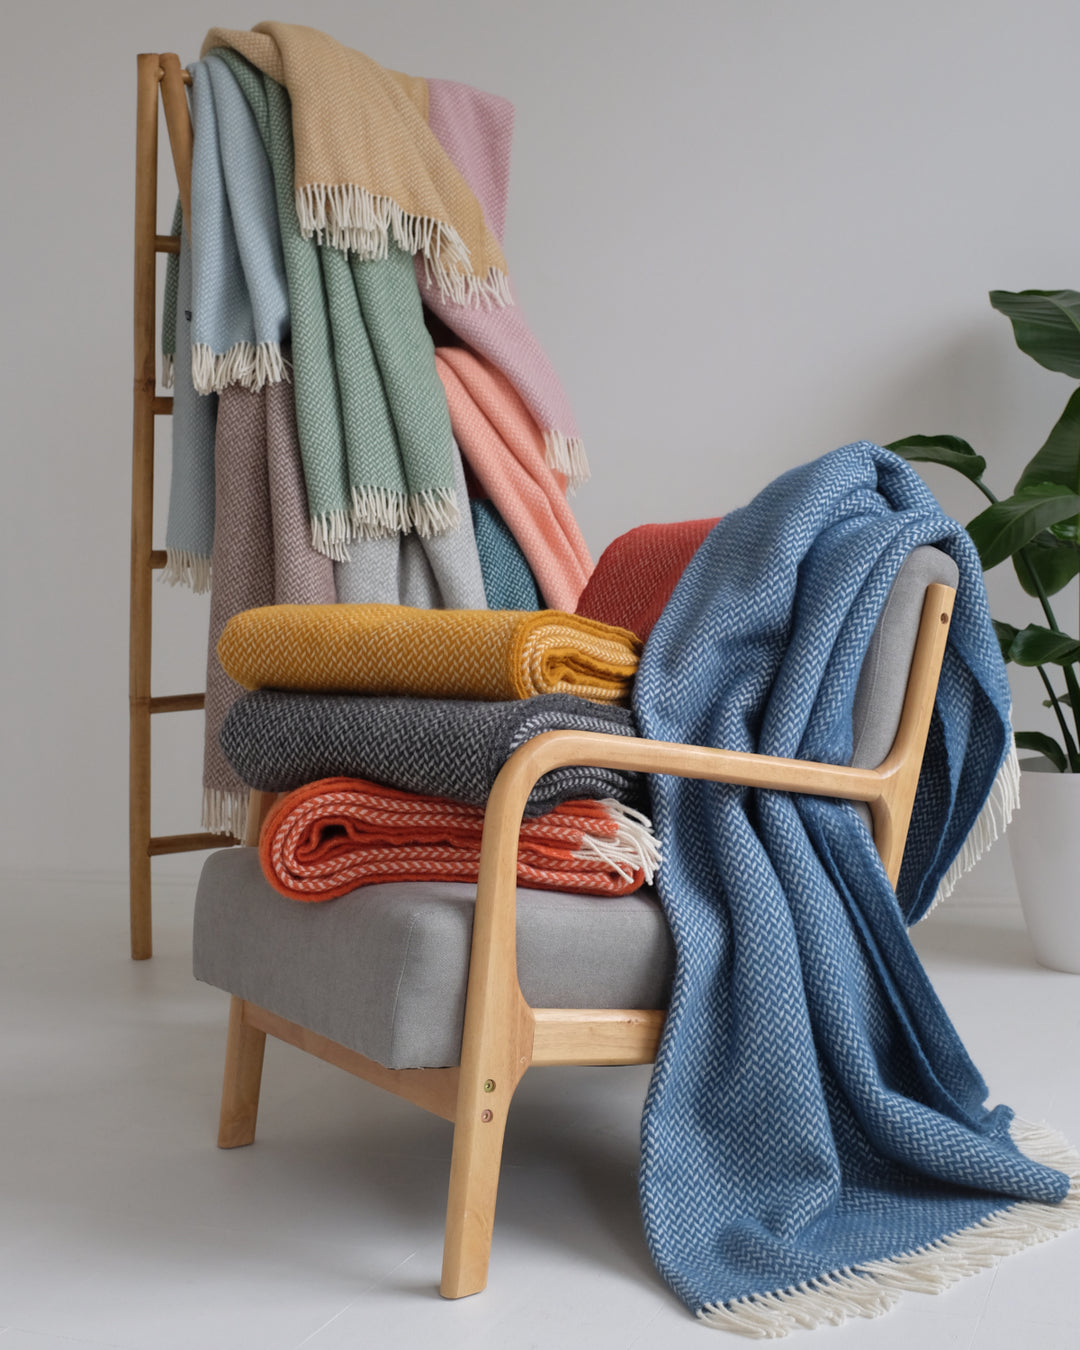 A blue wool blanket draped over a lounge chair next to a stack of folded blankets. Wool throws are hanging off a wooden ladder behind the chair